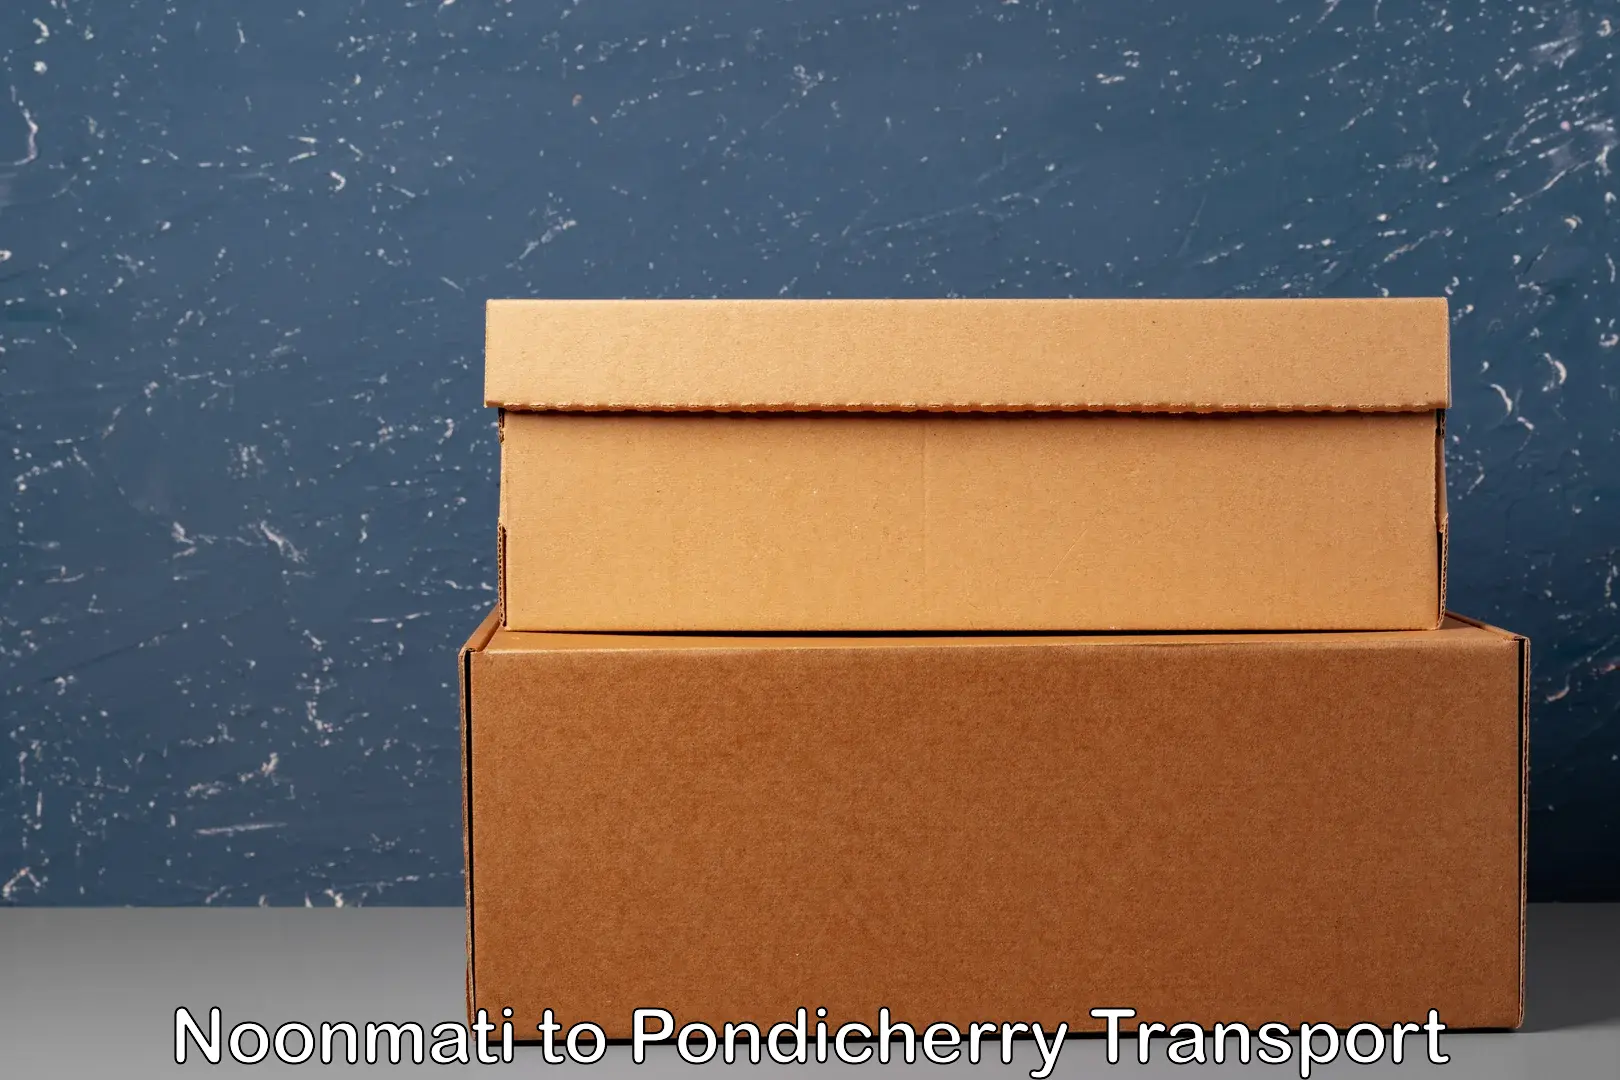 Daily parcel service transport Noonmati to Pondicherry